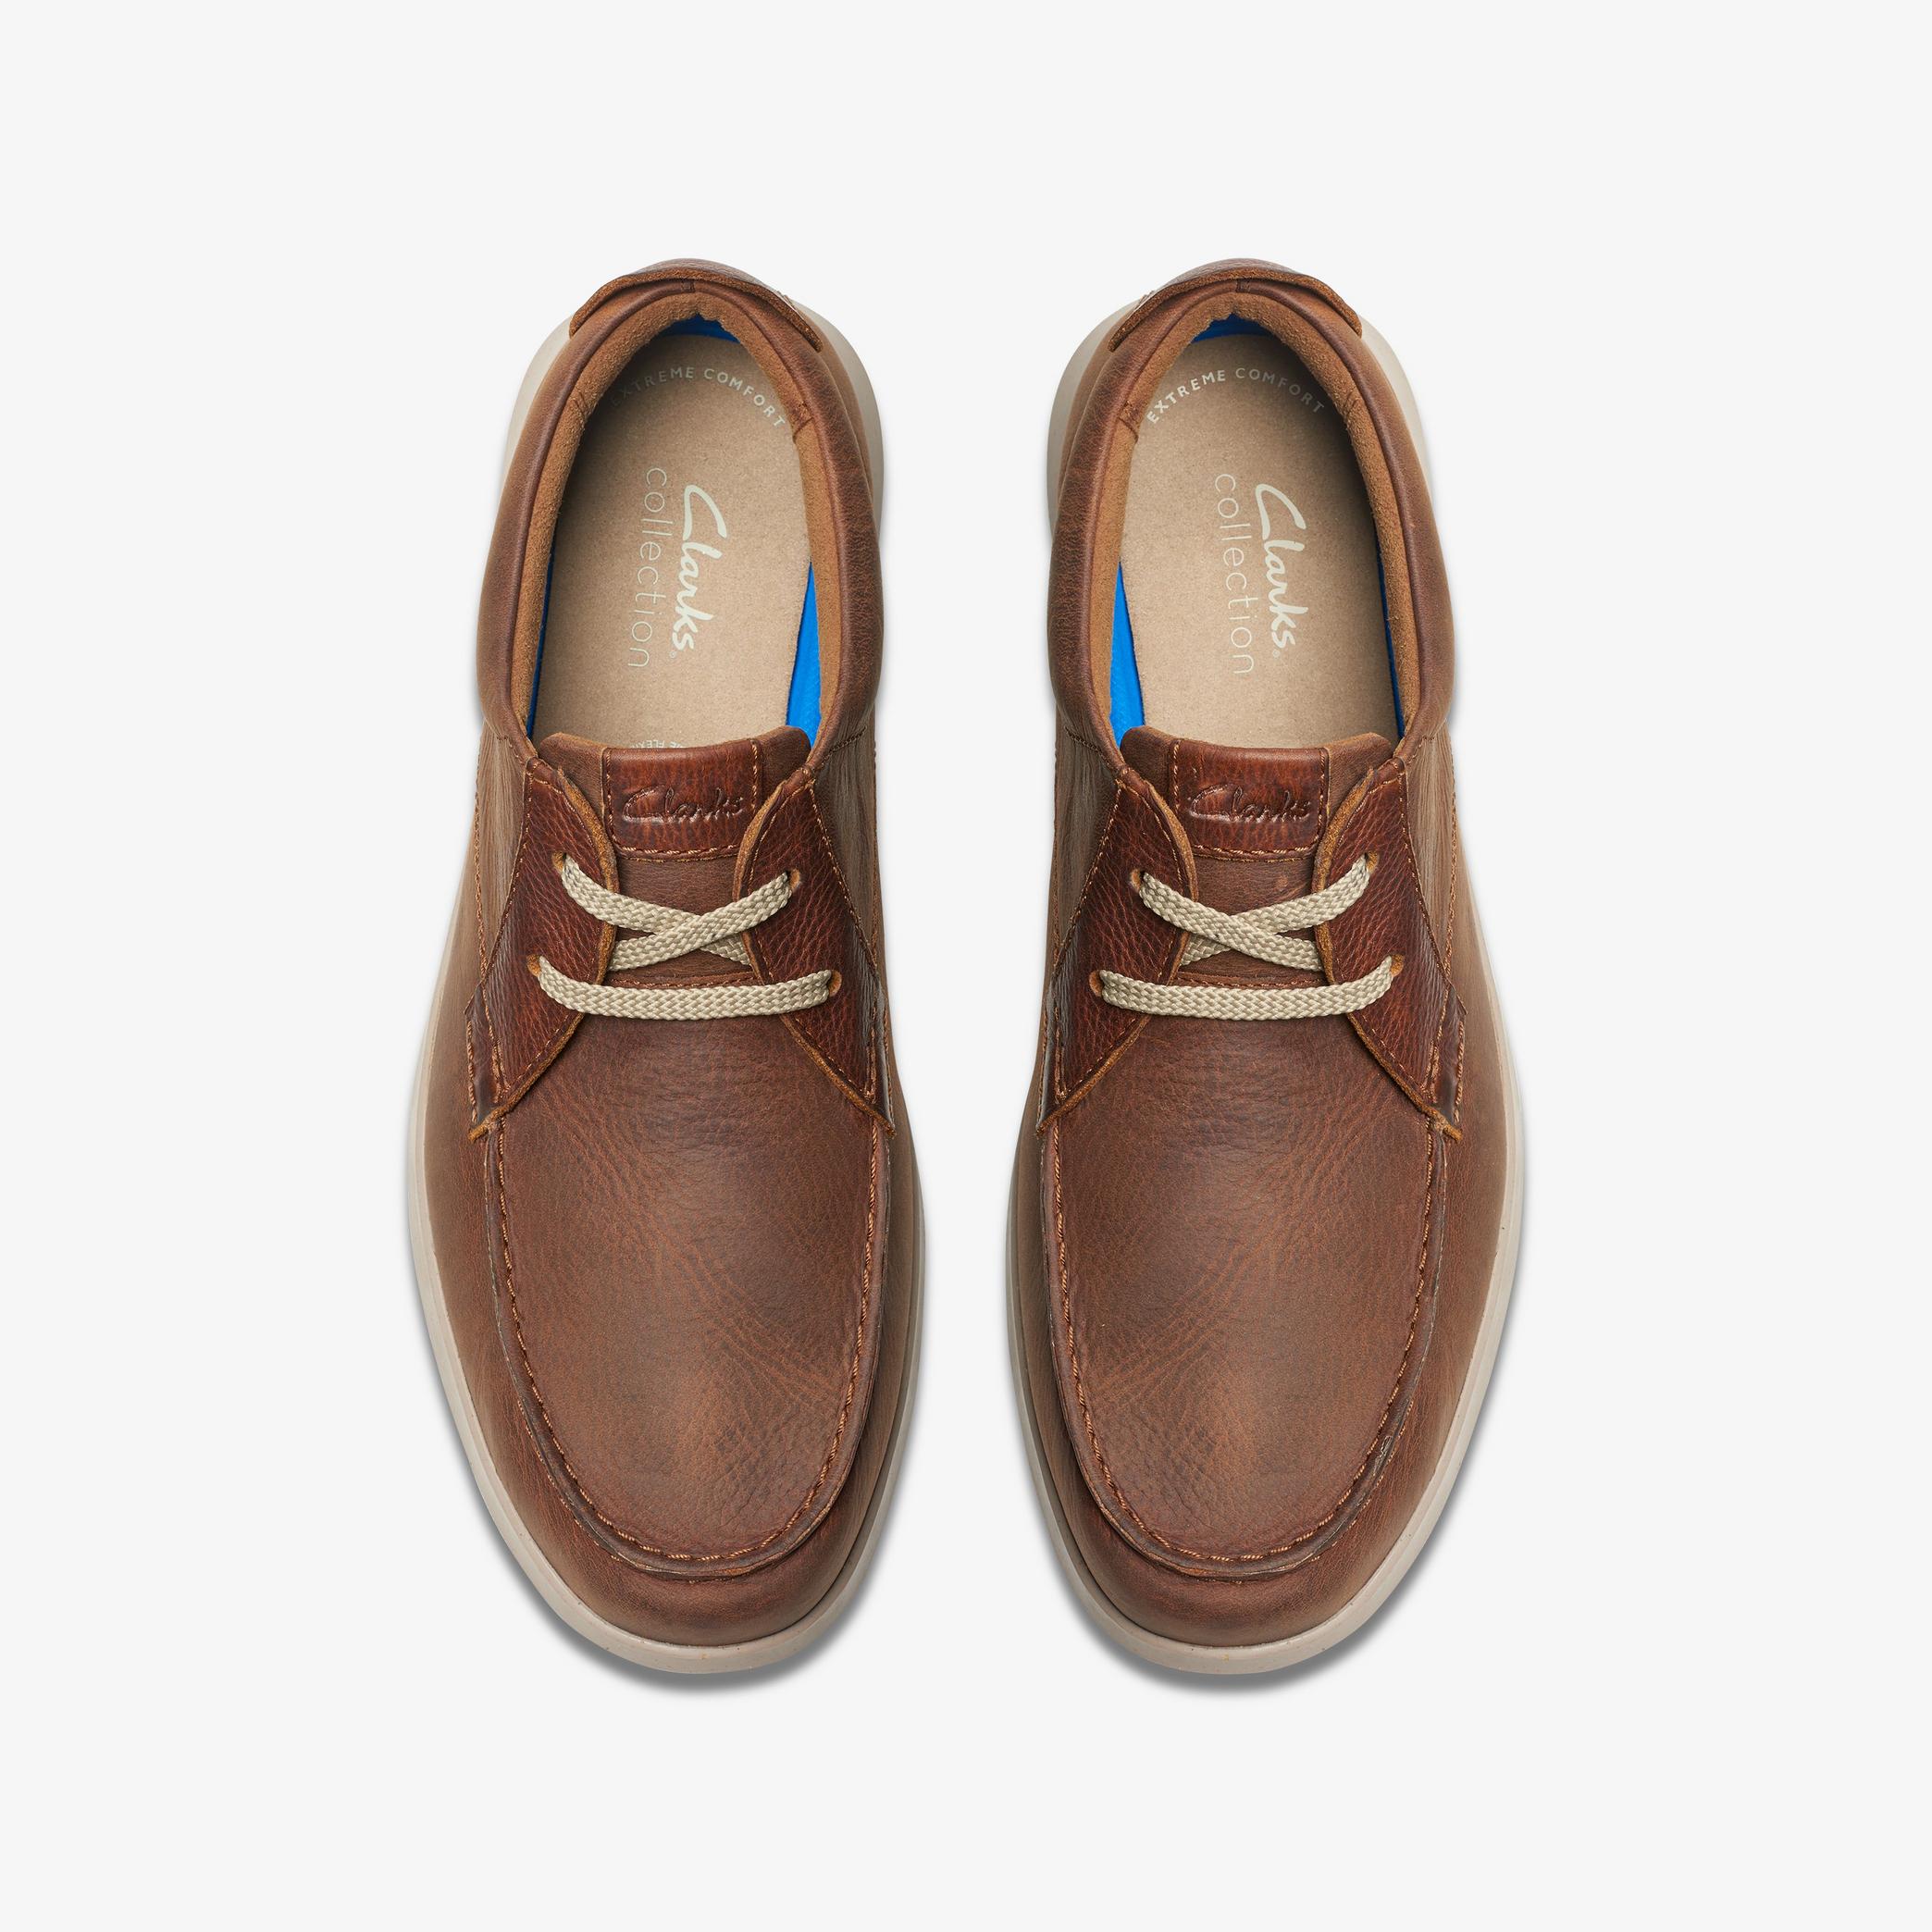 Flexway Lace Dark Tan Leather Boat Shoes, view 6 of 6